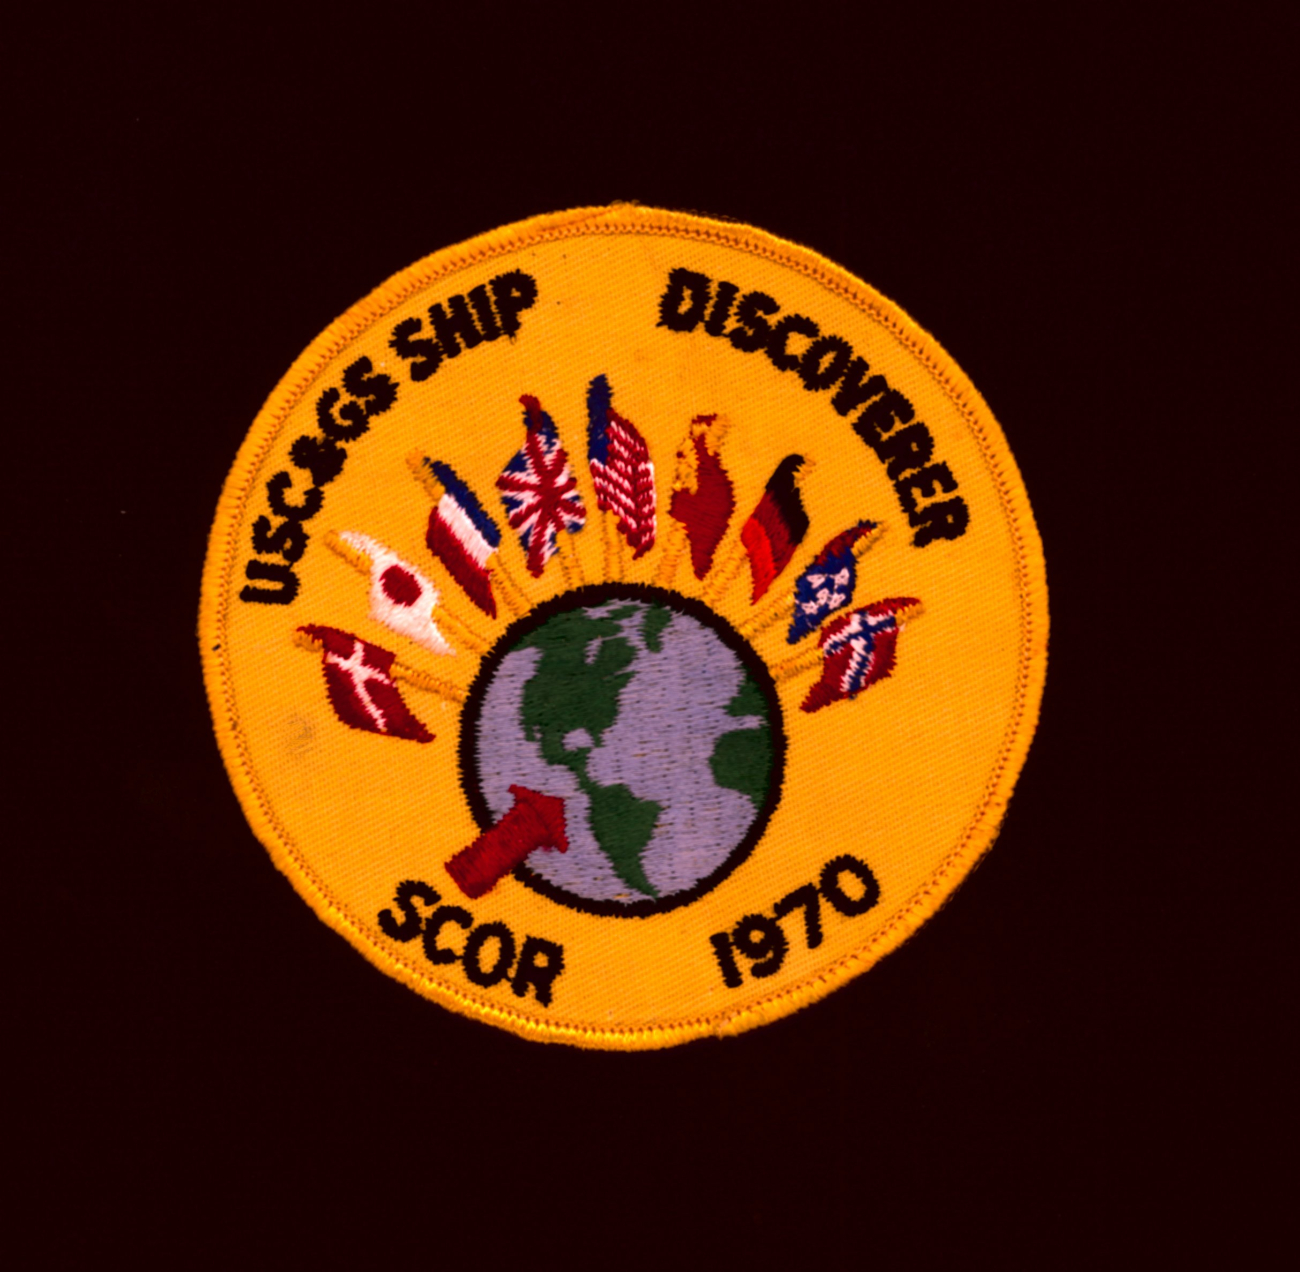 Patch commemorates the USC&GS; DISCOVERER participation in SCOR 1970